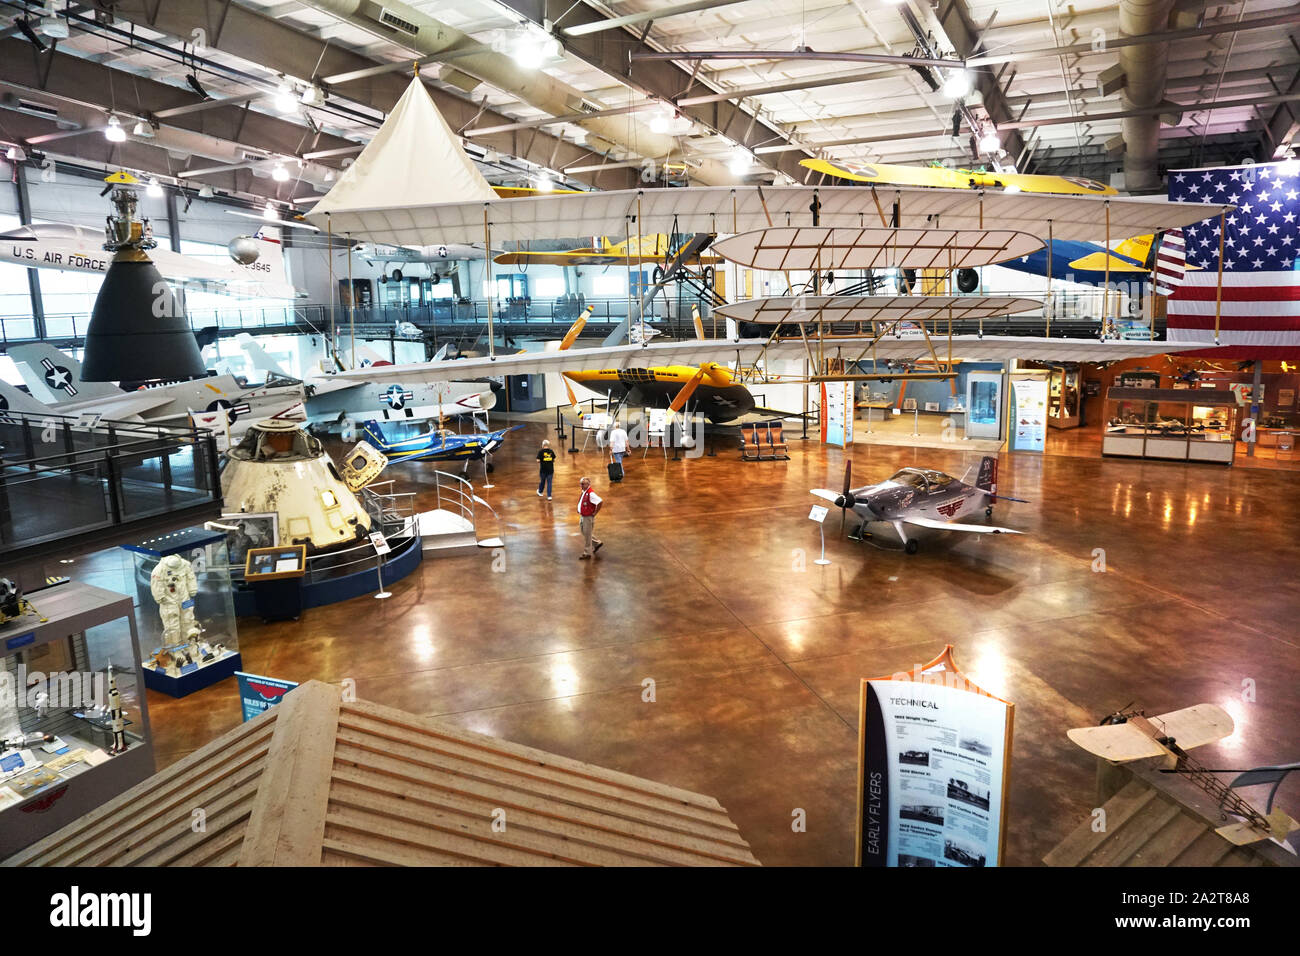 The main floor of t the  Frontiers of Flight Museum at Love Field in Dallas, Texas  Photo by Dennis Brack Stock Photo